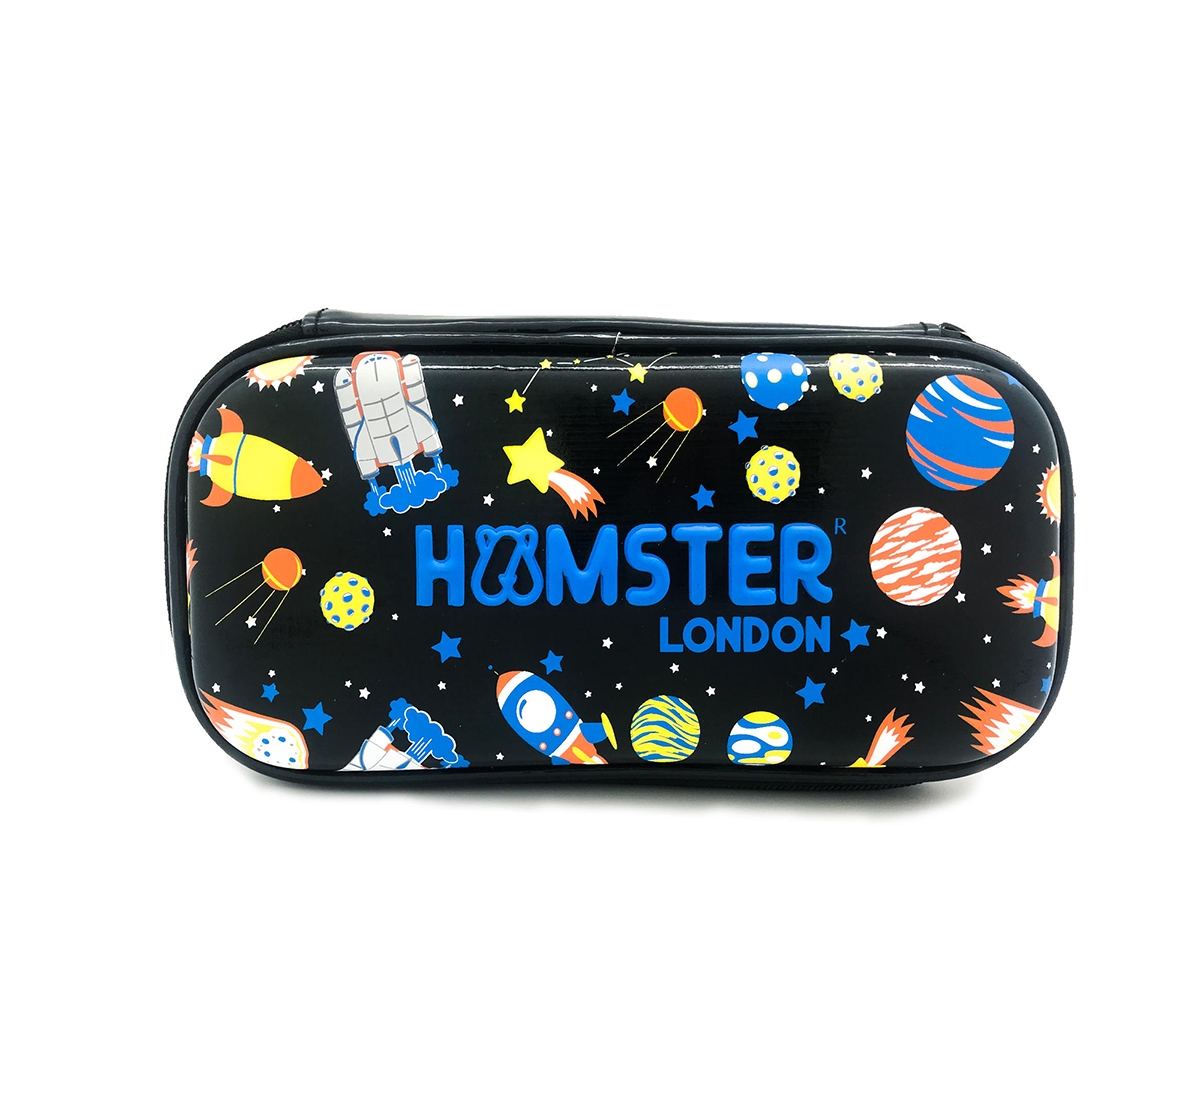 Hamster London | Hamster London Small Space Stationery Hardcase for Kids age 3Y+ (Black)